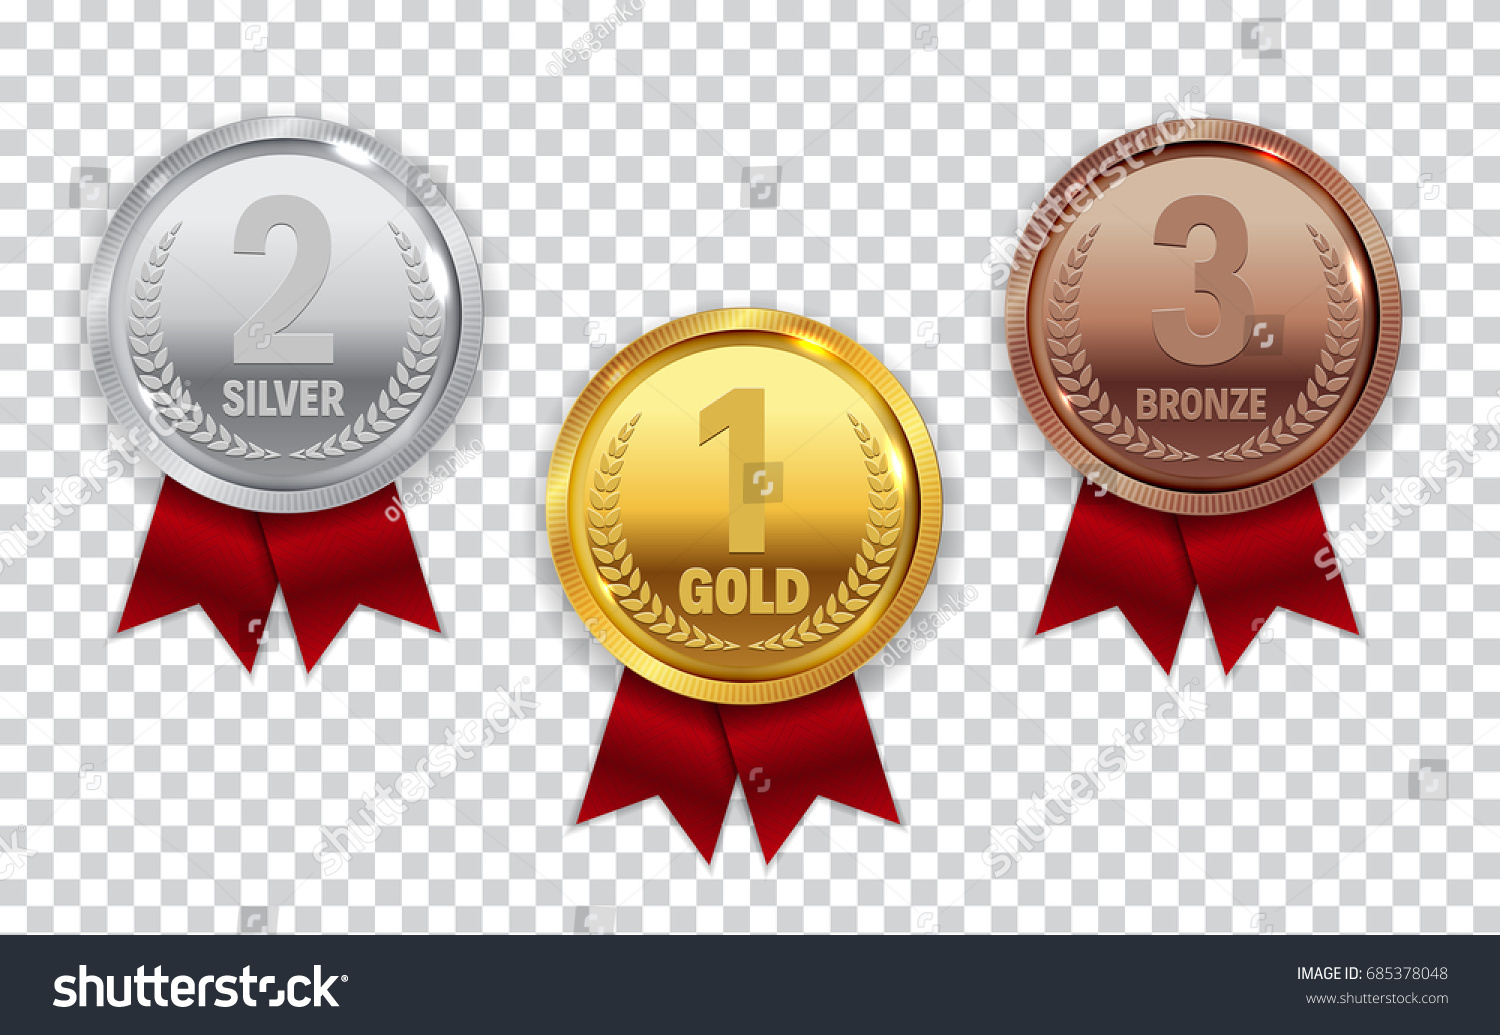 Champion Gold, Silver and Bronze Medal with Red Ribbon Icon Sign First, Second and Third Place Collection Set Isolated on Transparent Background. Vector Illustration EPS10 #685378048